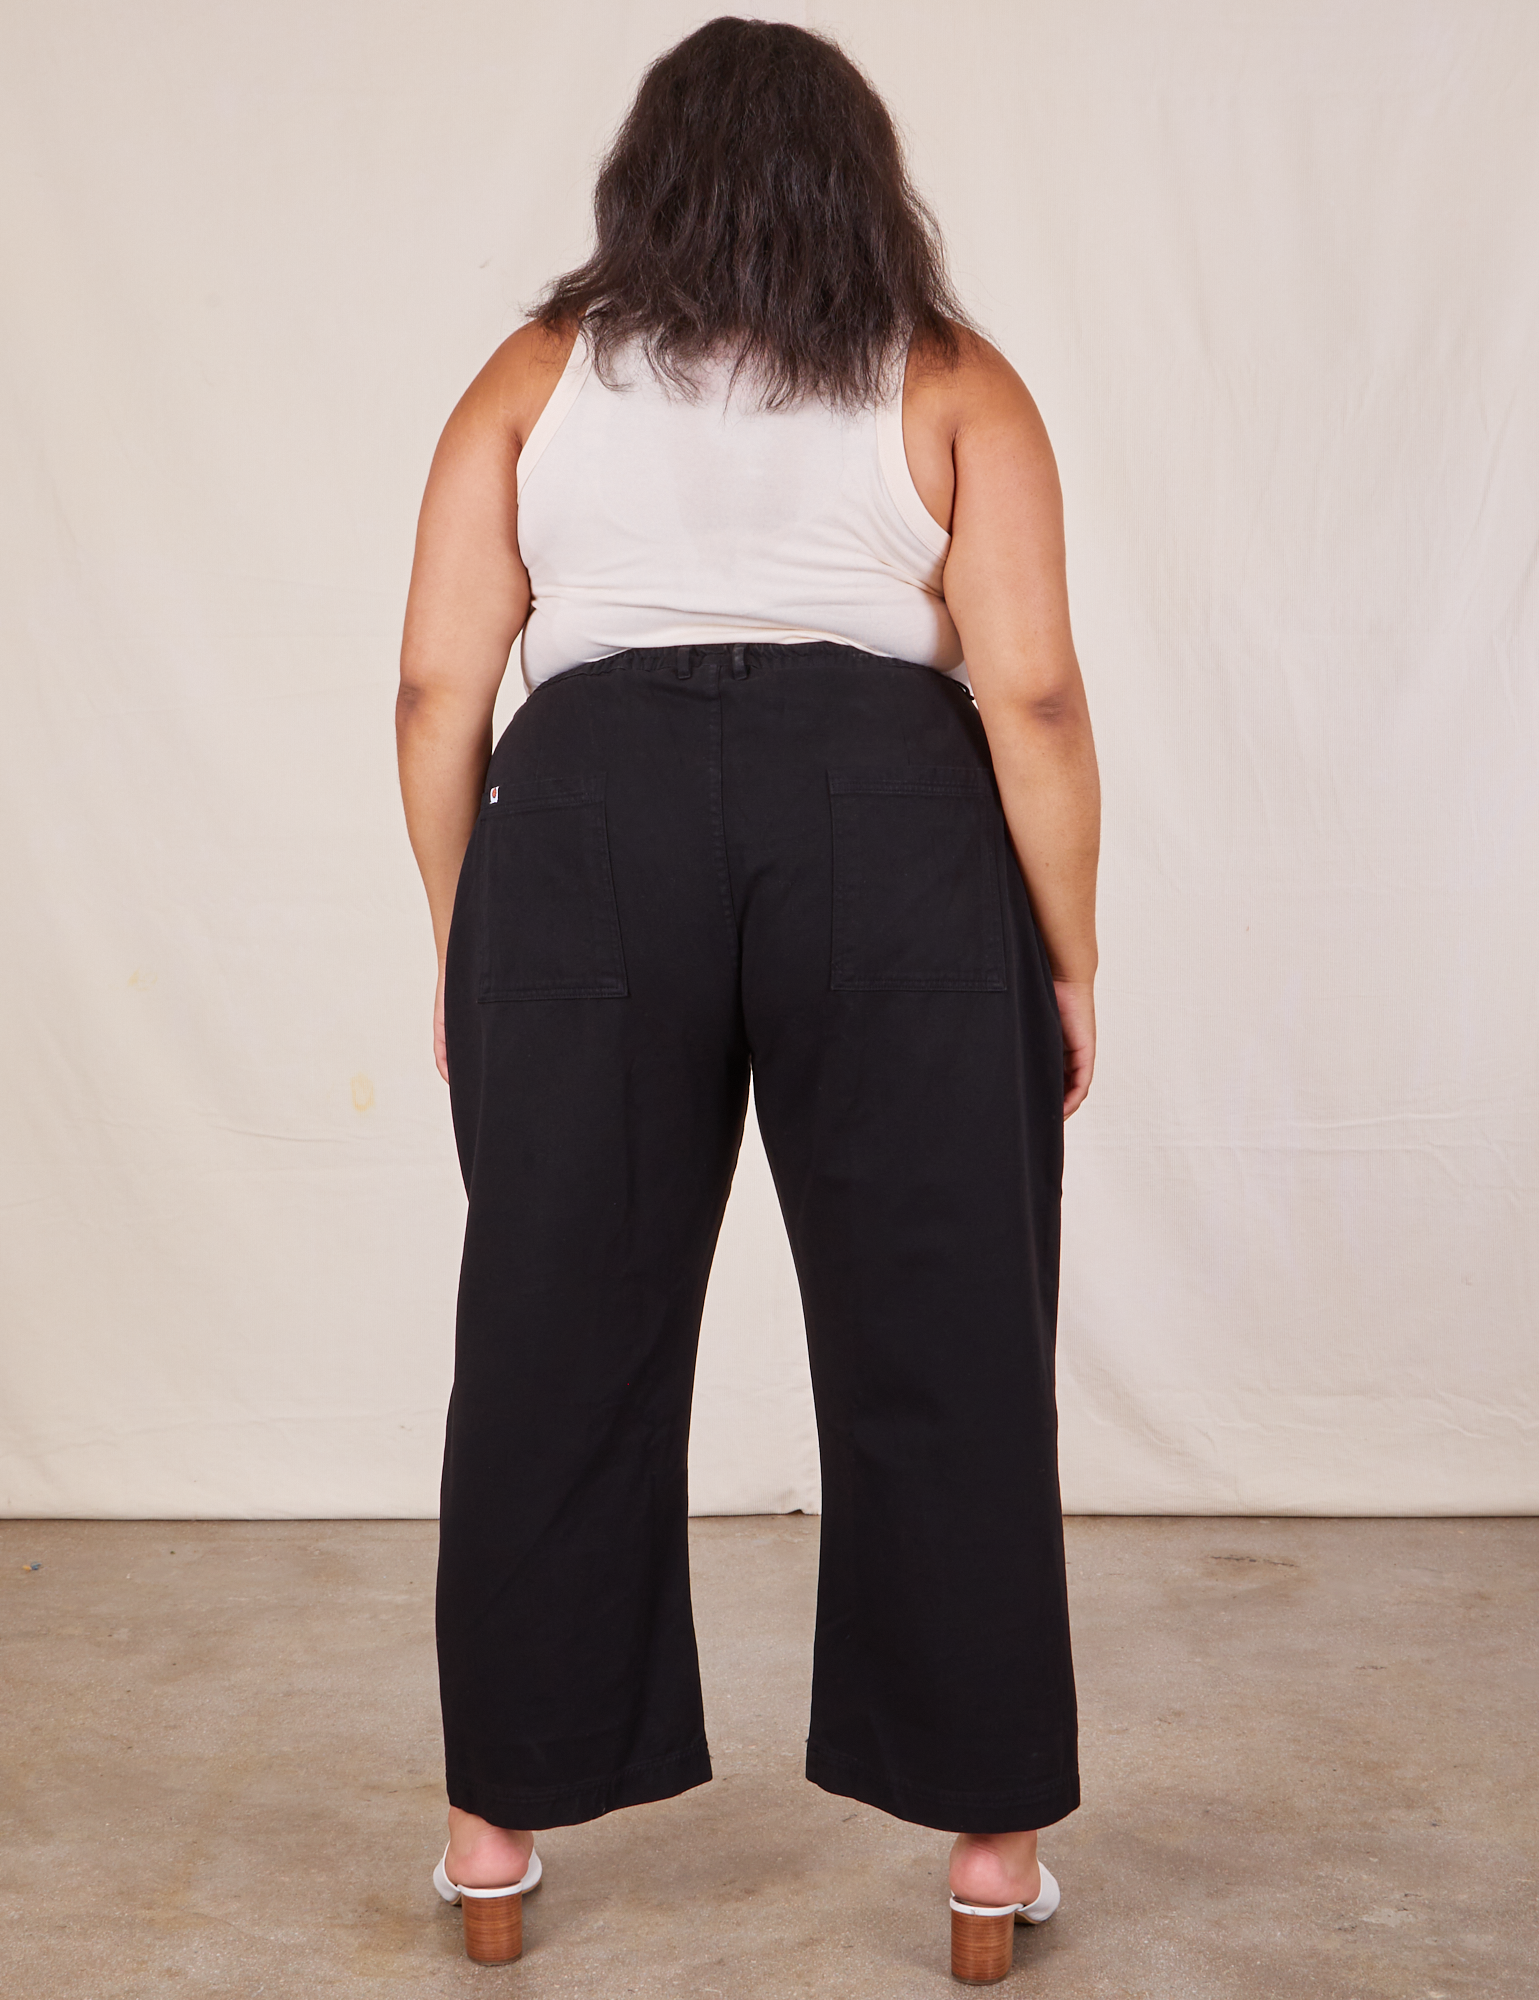 Back view of Western Pants in Basic Black and Tank Top in vintage tee off-whiteworn by Alicia